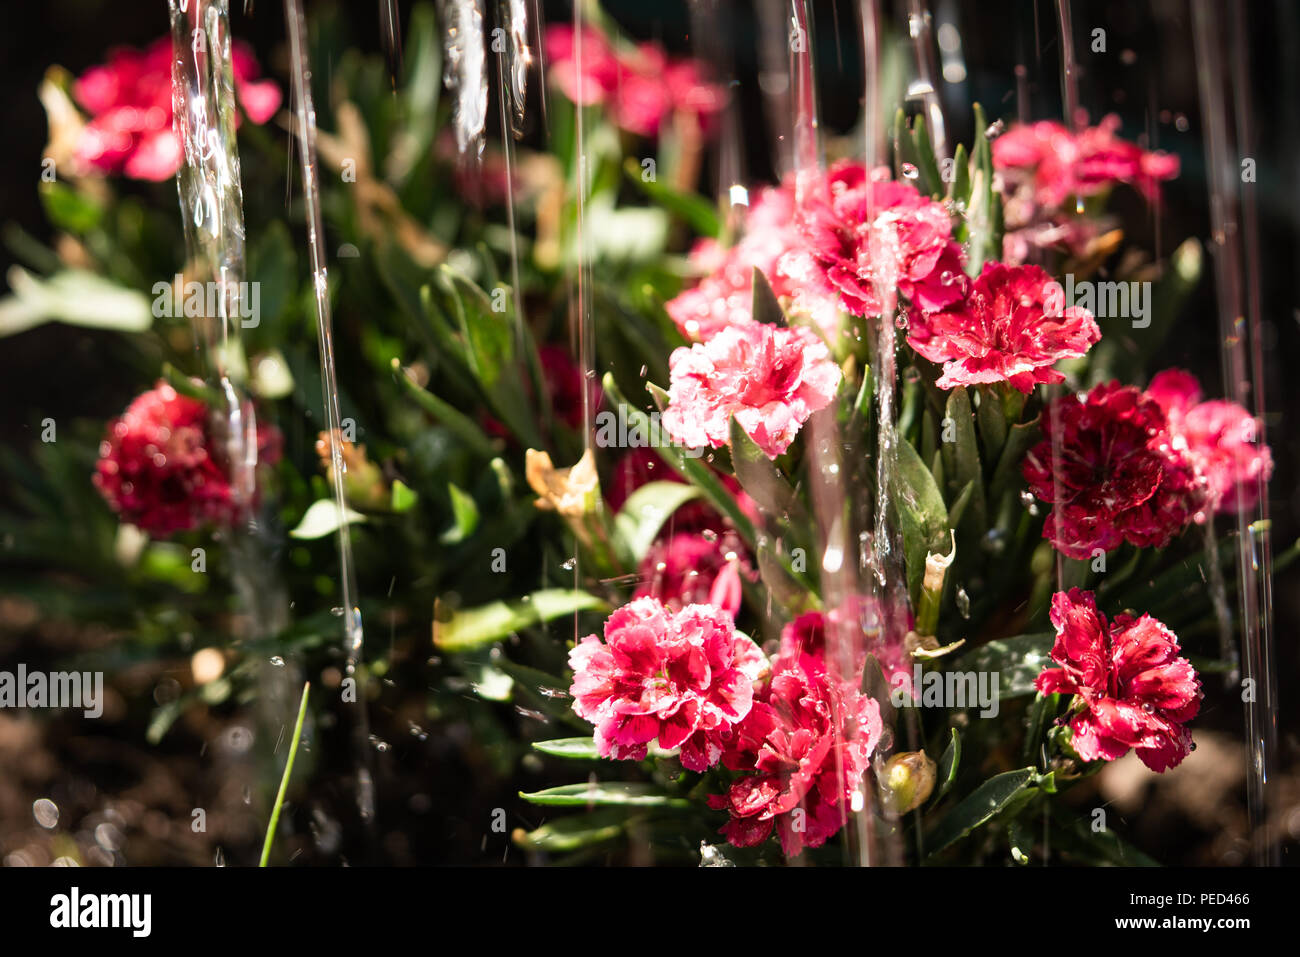 Some red-pinkish flowers are being watered. Stock Photo